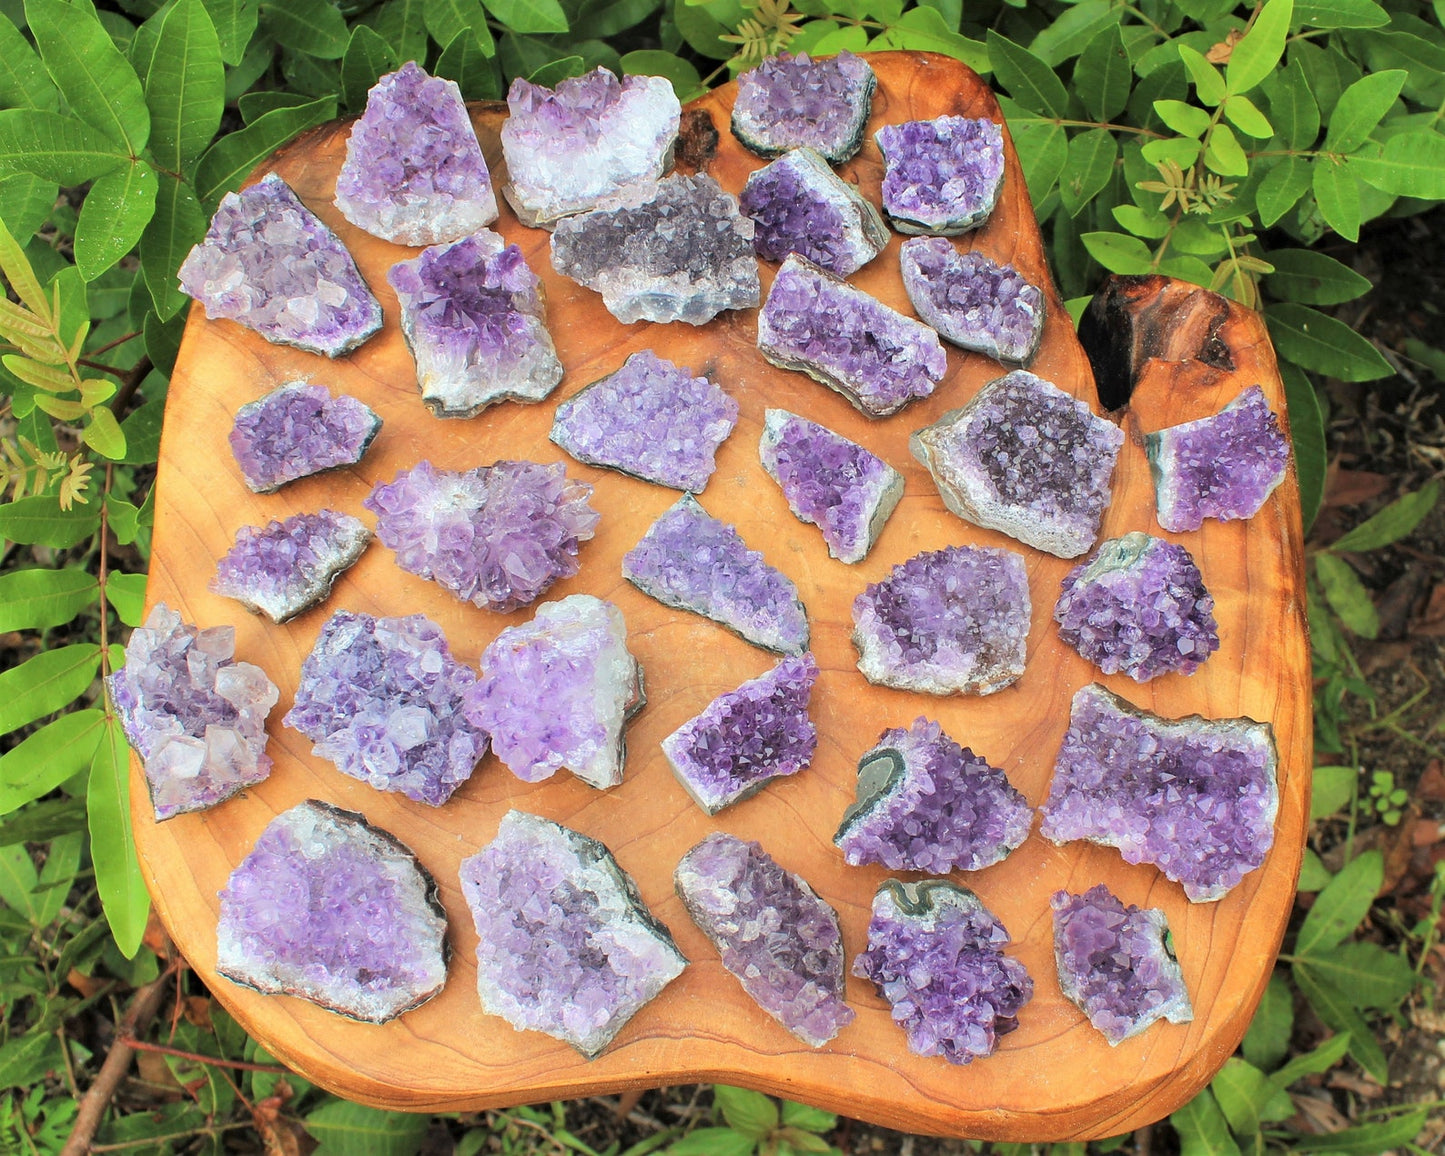 Natural Amethyst Clusters Druze